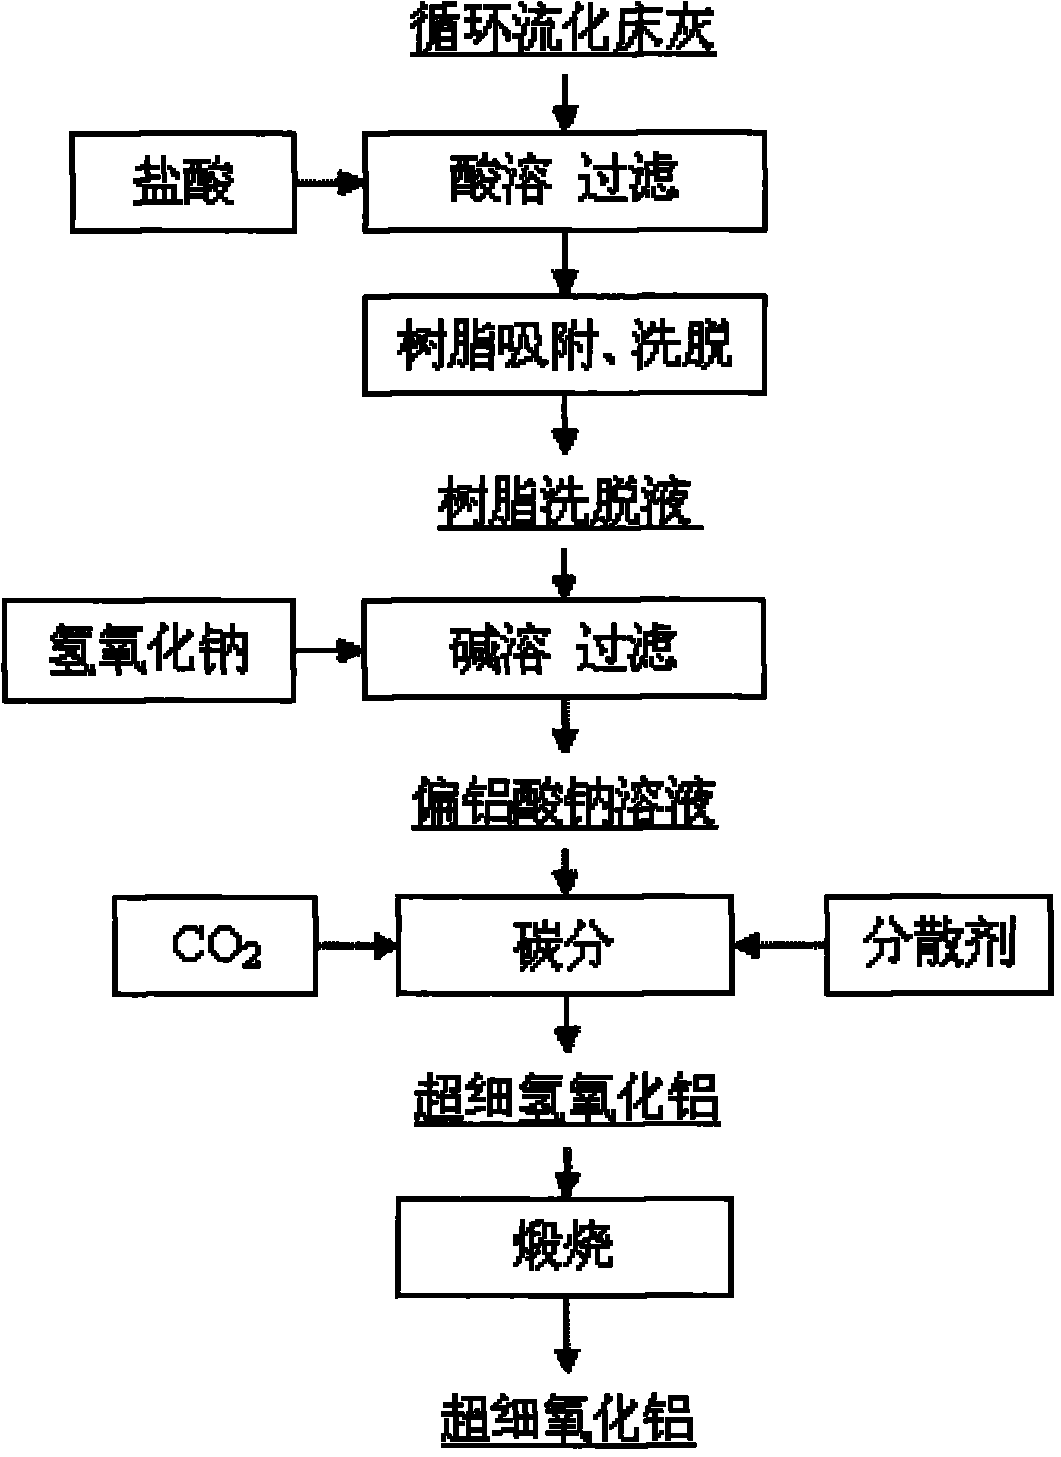 Method for producing superfine aluminium hydroxide and aluminium oxide by using flyash